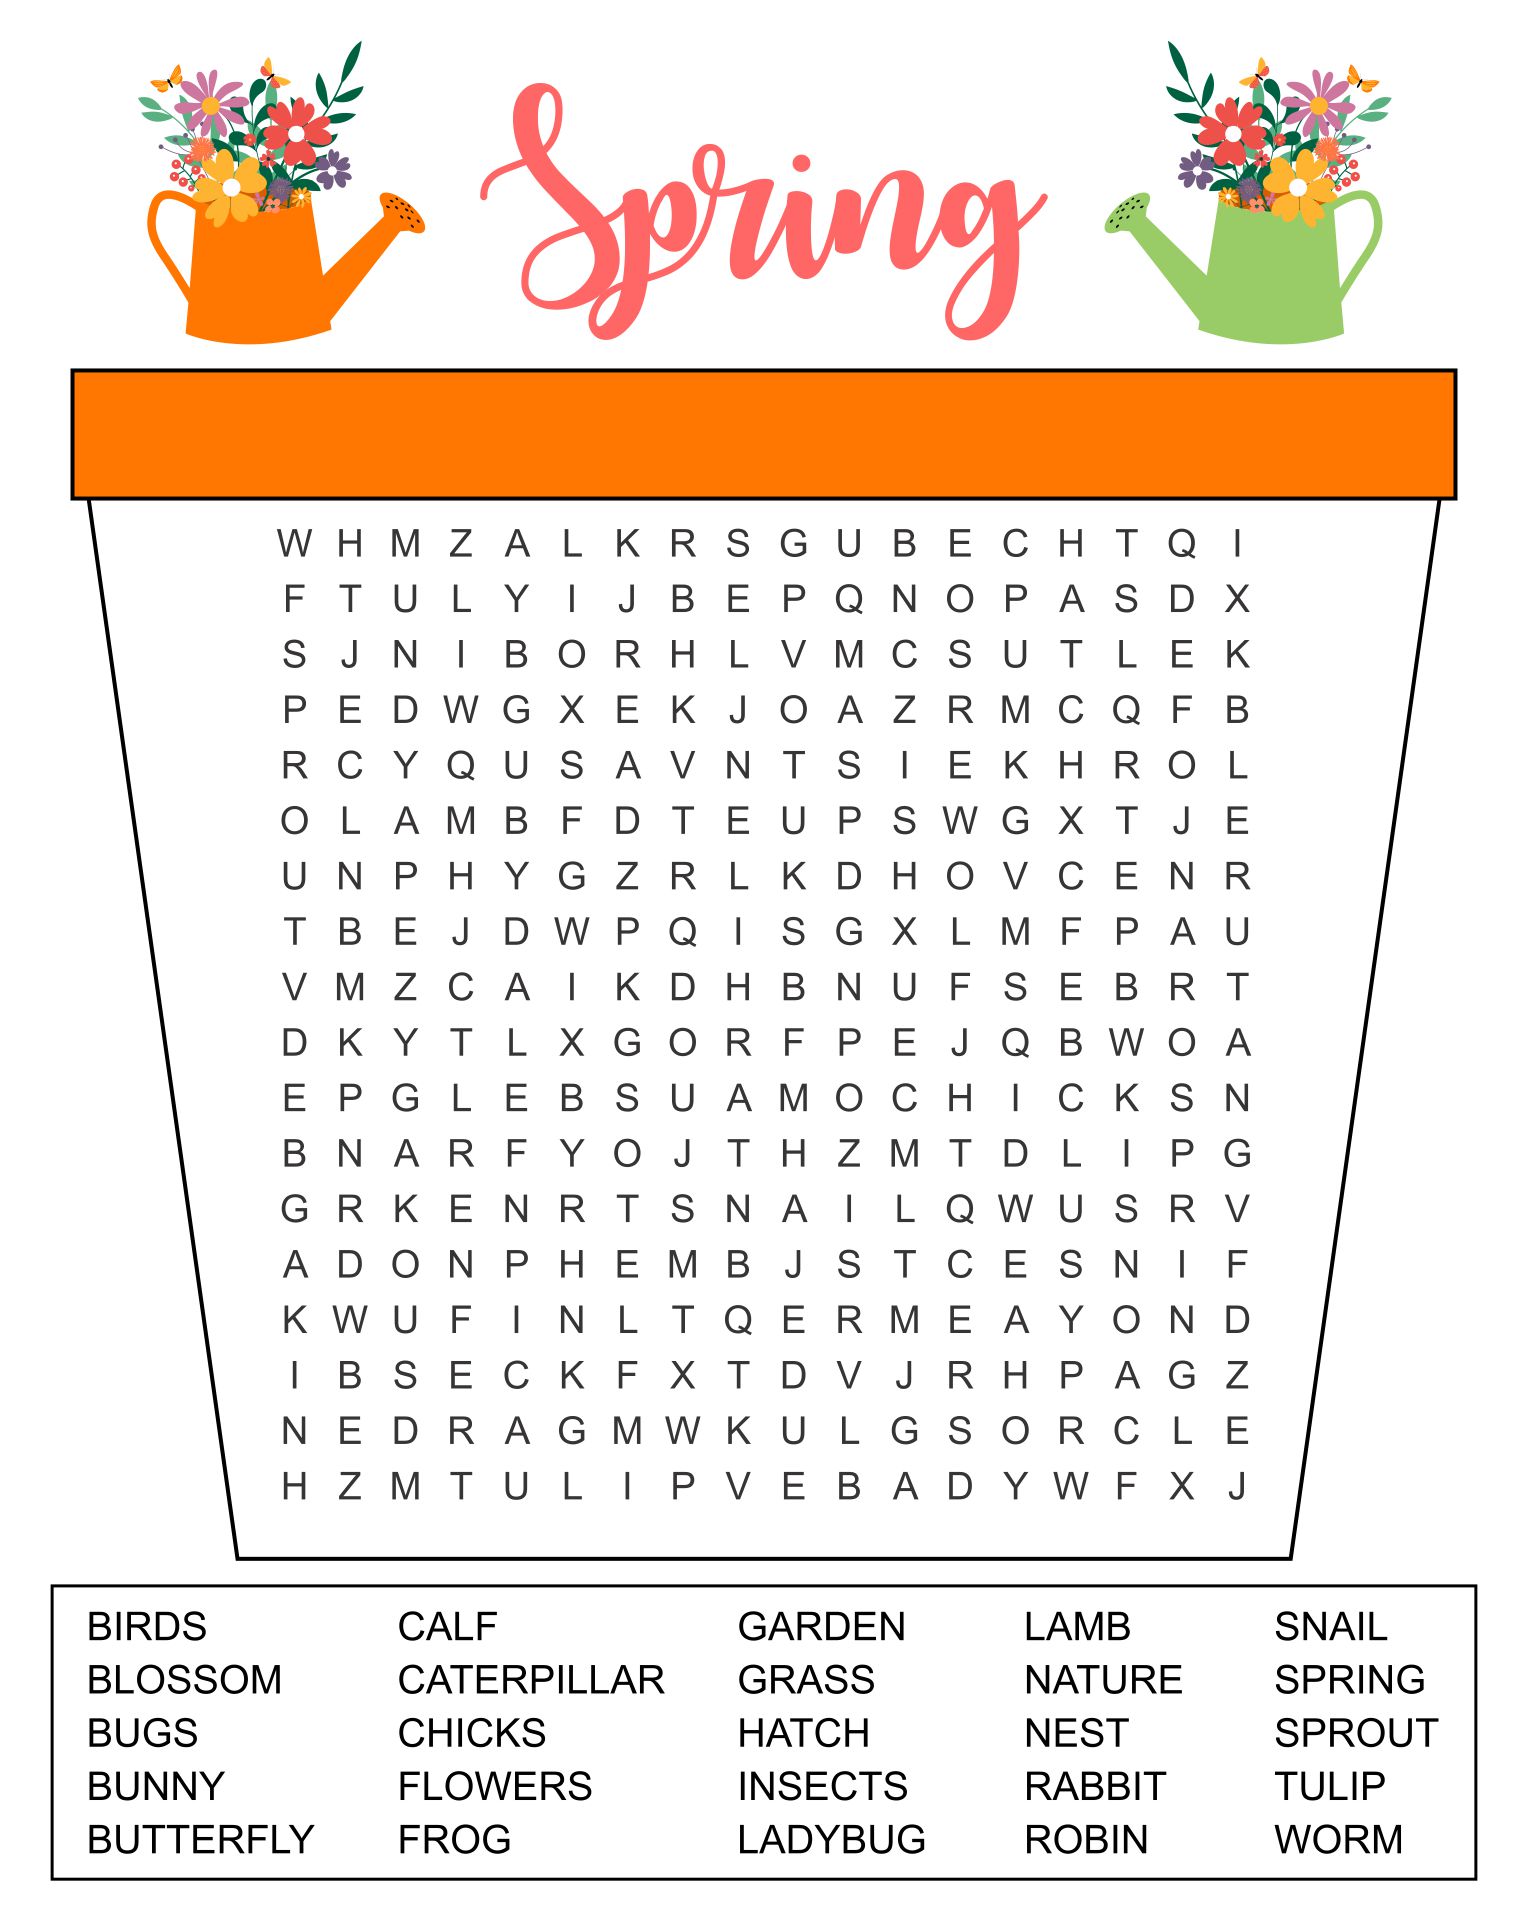 Spring Word Search Printable Difficult